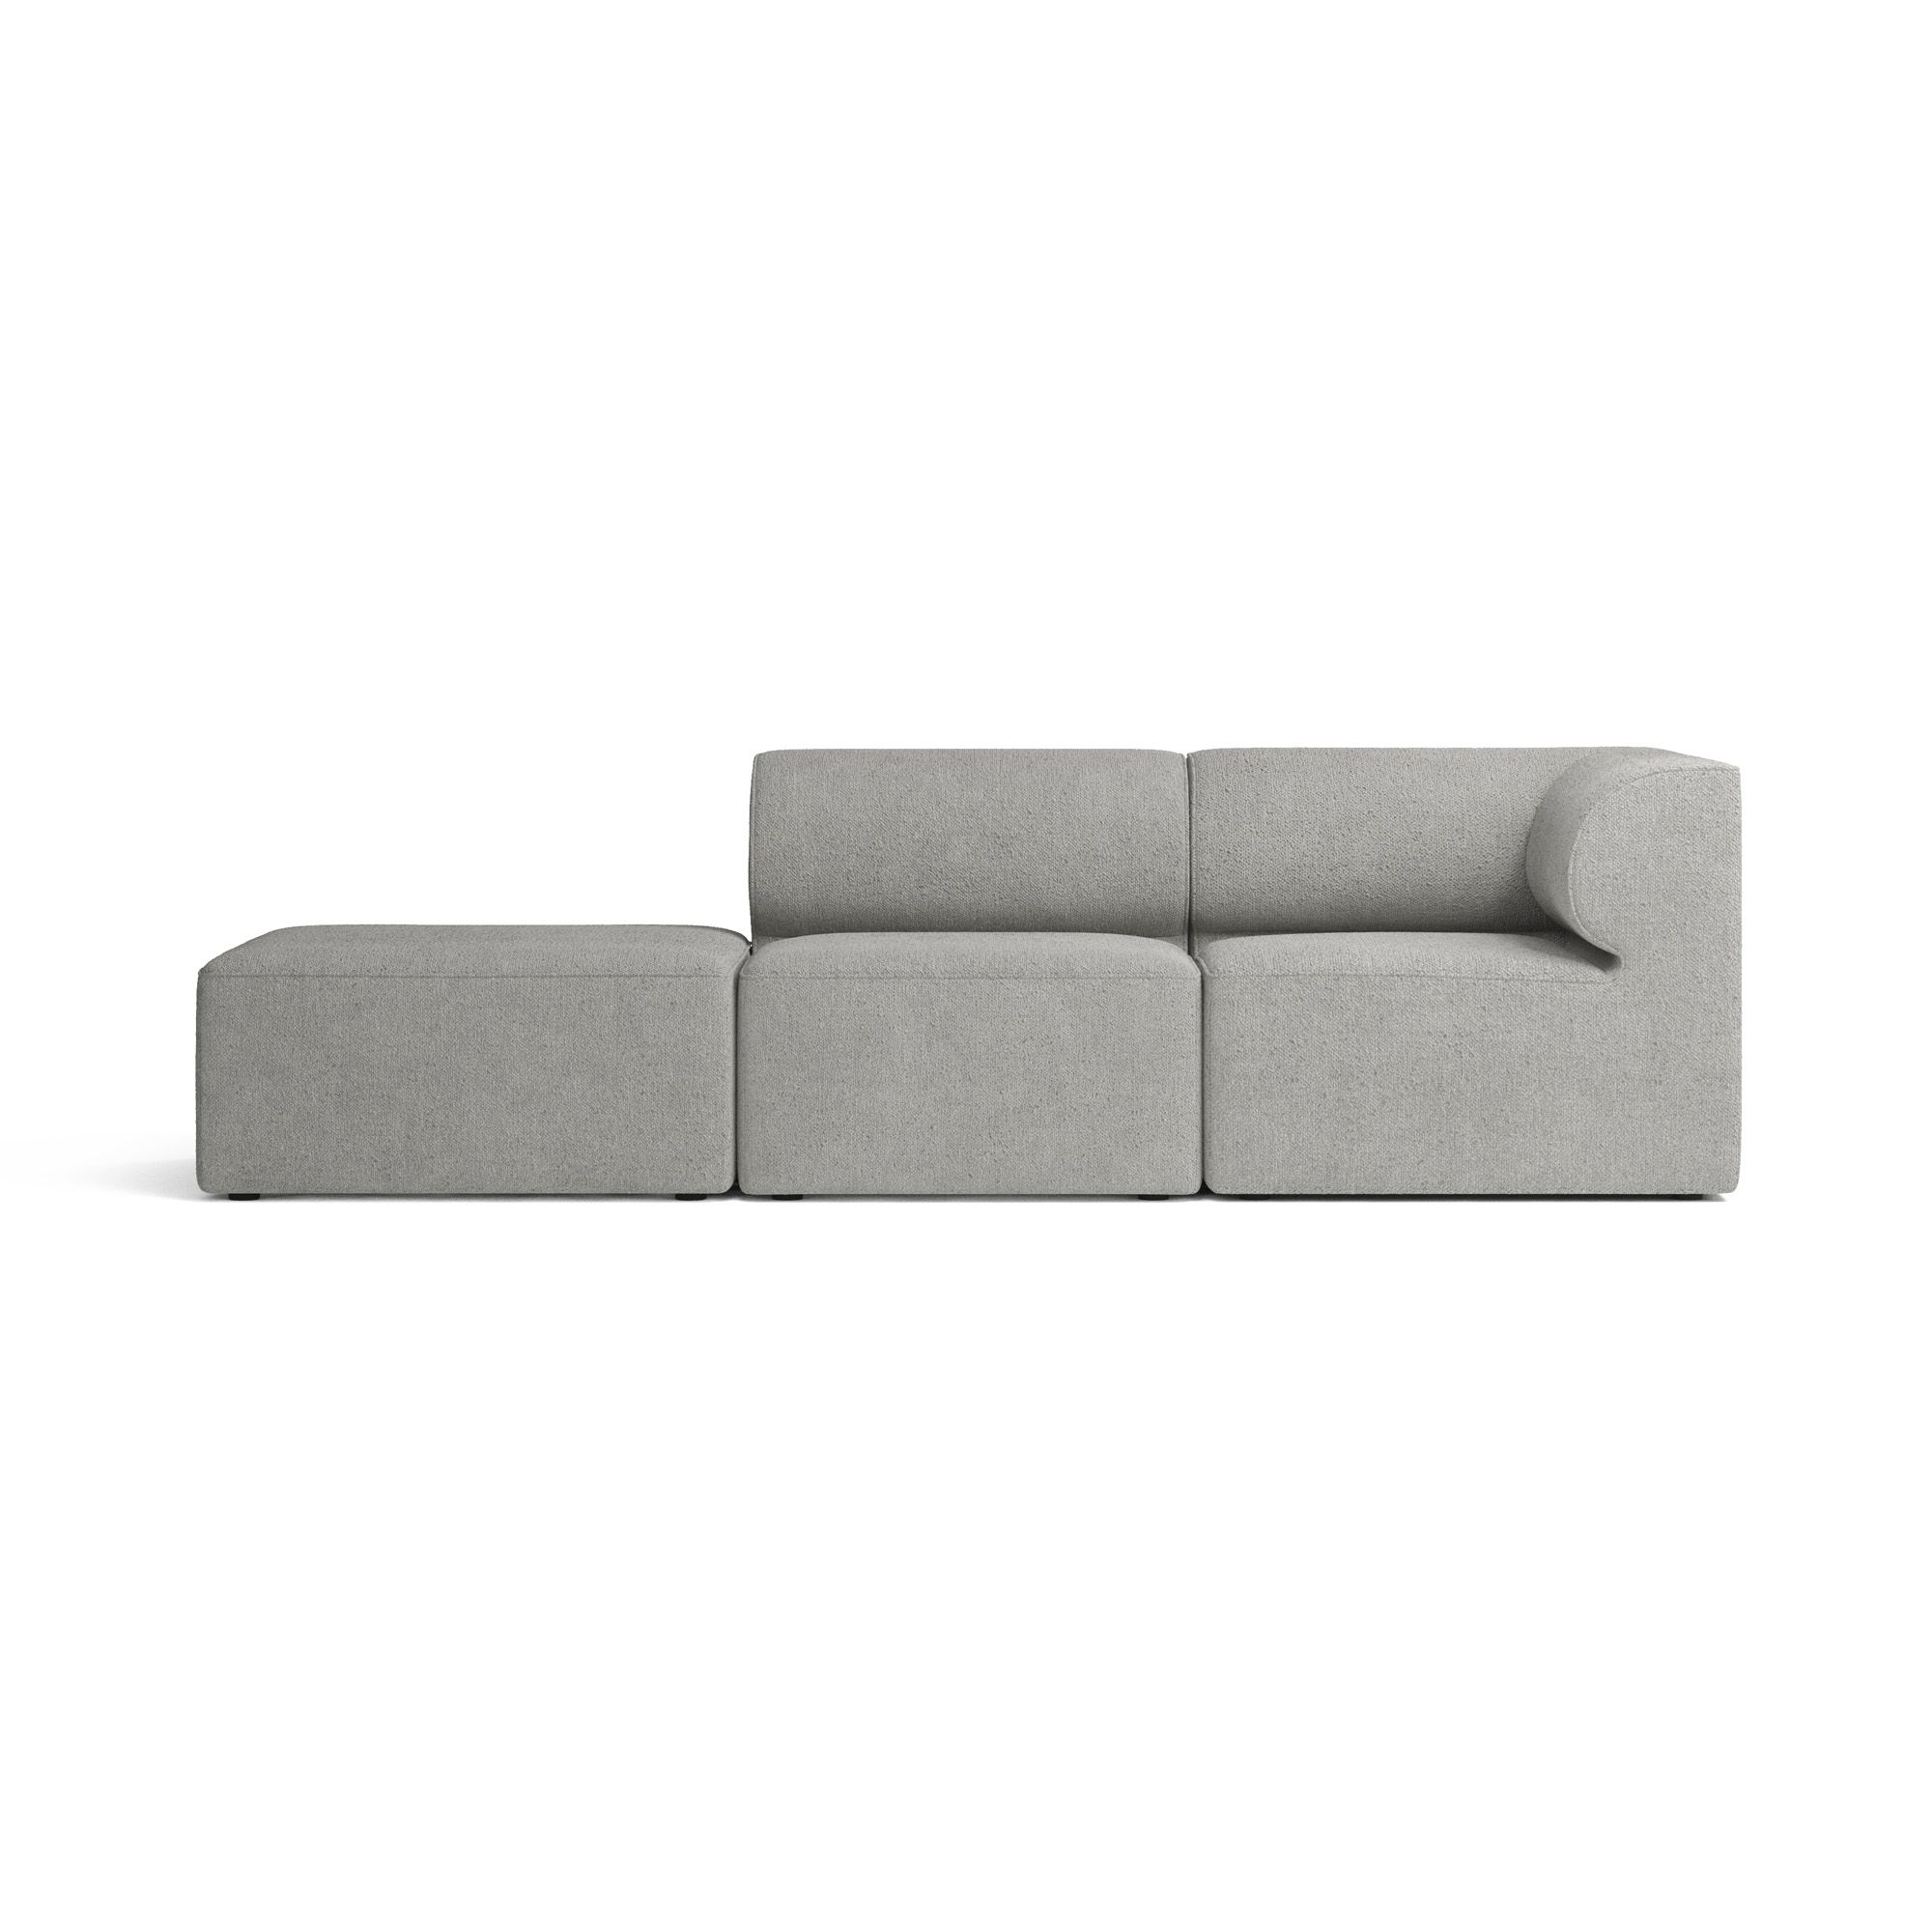 Menu Eave Left Modular Sofa – 2 Seater + Pouf Throughout Modular Couches (View 9 of 20)